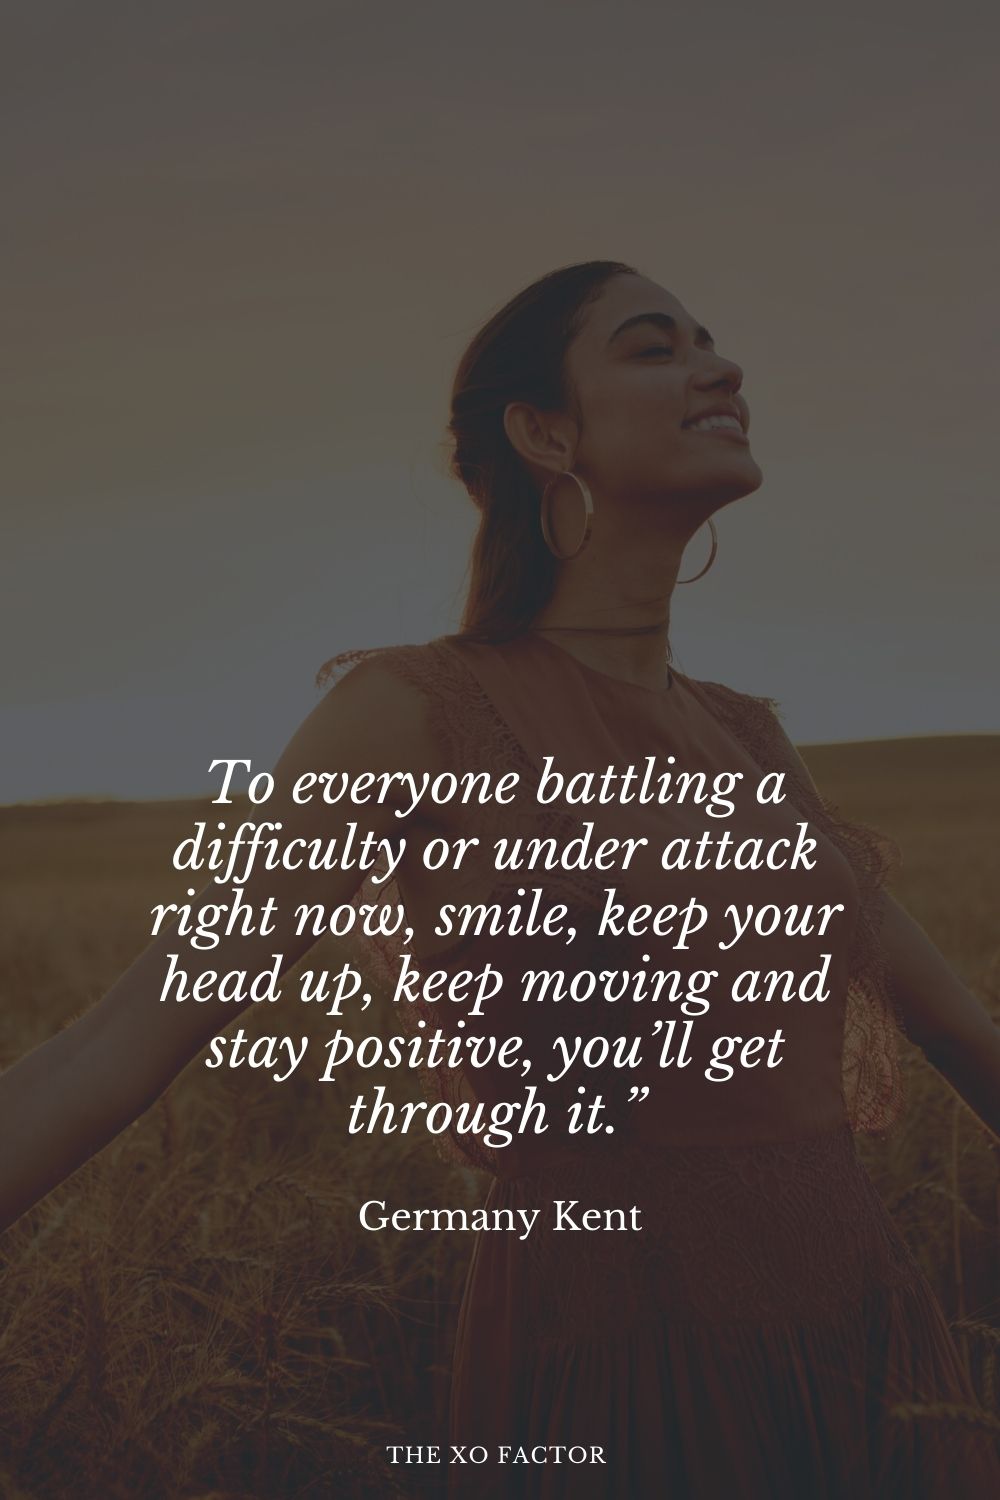 To everyone battling a difficulty or under attack right now, smile, keep your head up, keep moving and stay positive, you’ll get through it.” Germany Kent